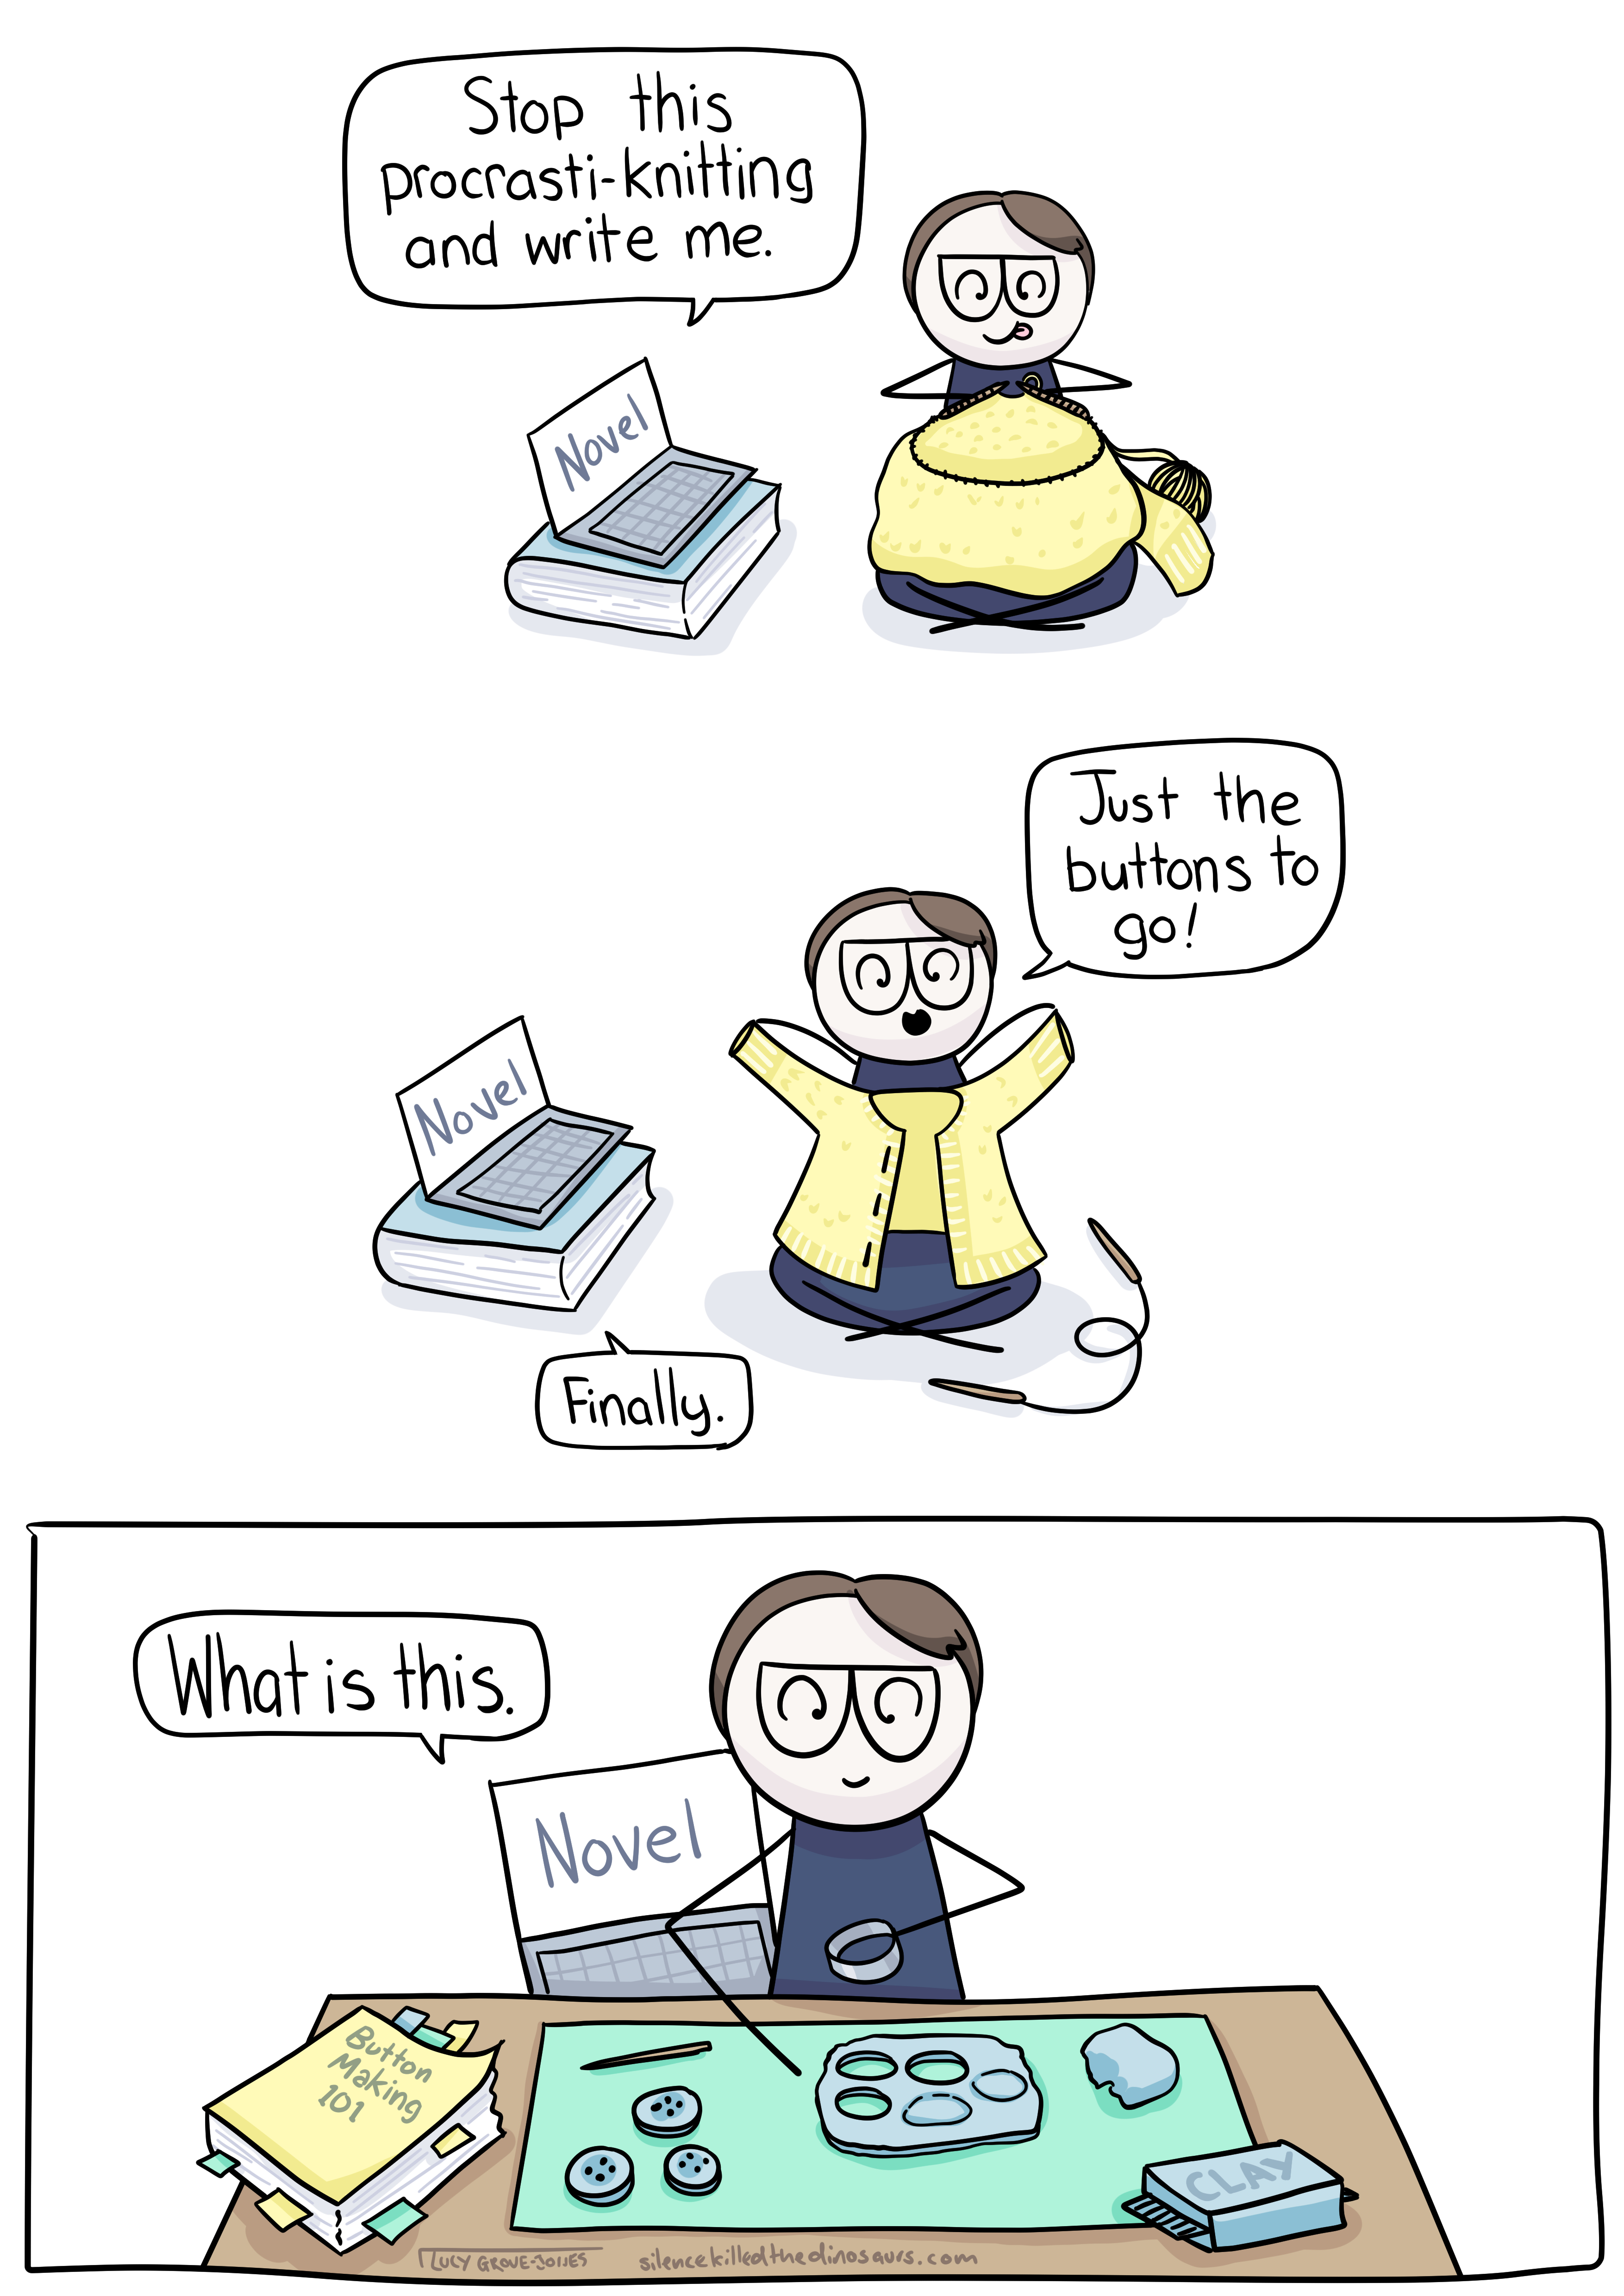 Comic with three panels. In the first, comic lucy is sitting and knitting a cardigan. Her laptop is next to her with the word 'NOVEL' on the screen and says 'Stop this procrasti-knitting and write me.'. In the second panel comic lucy holds up the almost-finished cardigan and says 'Just the buttons to go!' and her laptop says 'finally.' In the final pattern comic lucy is making buttons from scratch out of clay. Her laptop peeks over her shoulder and says 'What is this.'